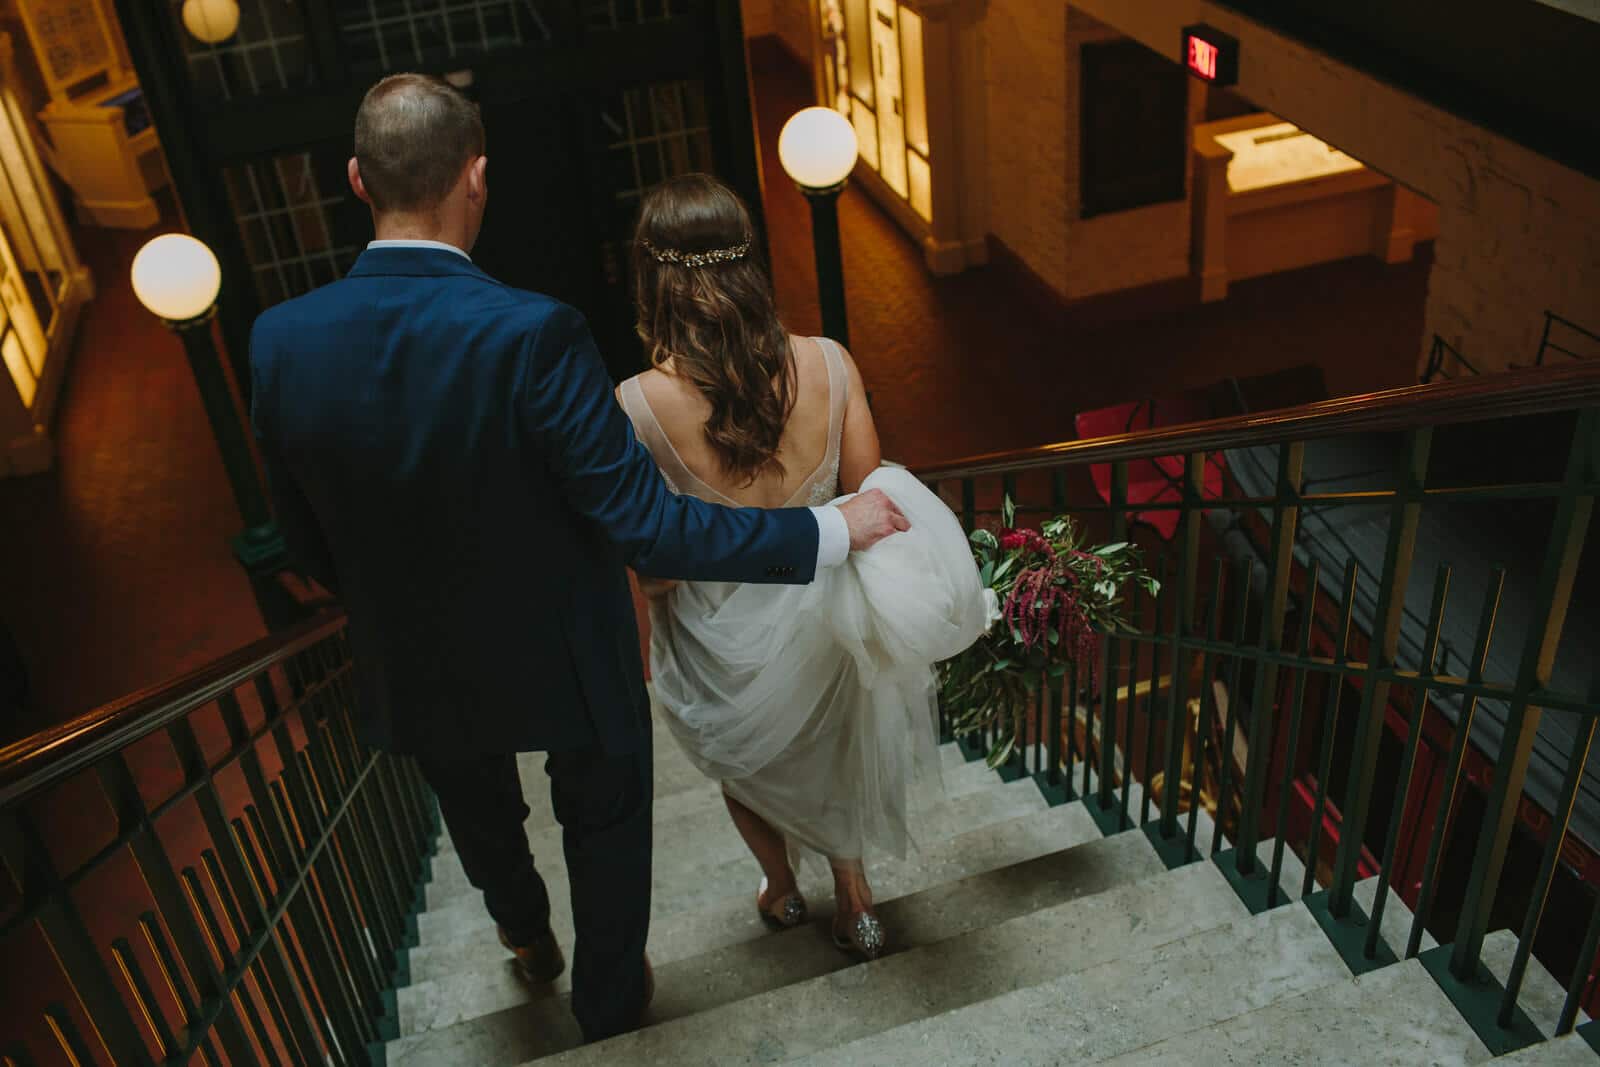 Adam Lowe photography, Columbus, Ohio, wedding, bride and groom, style, cool, editorial, fashion, downtown